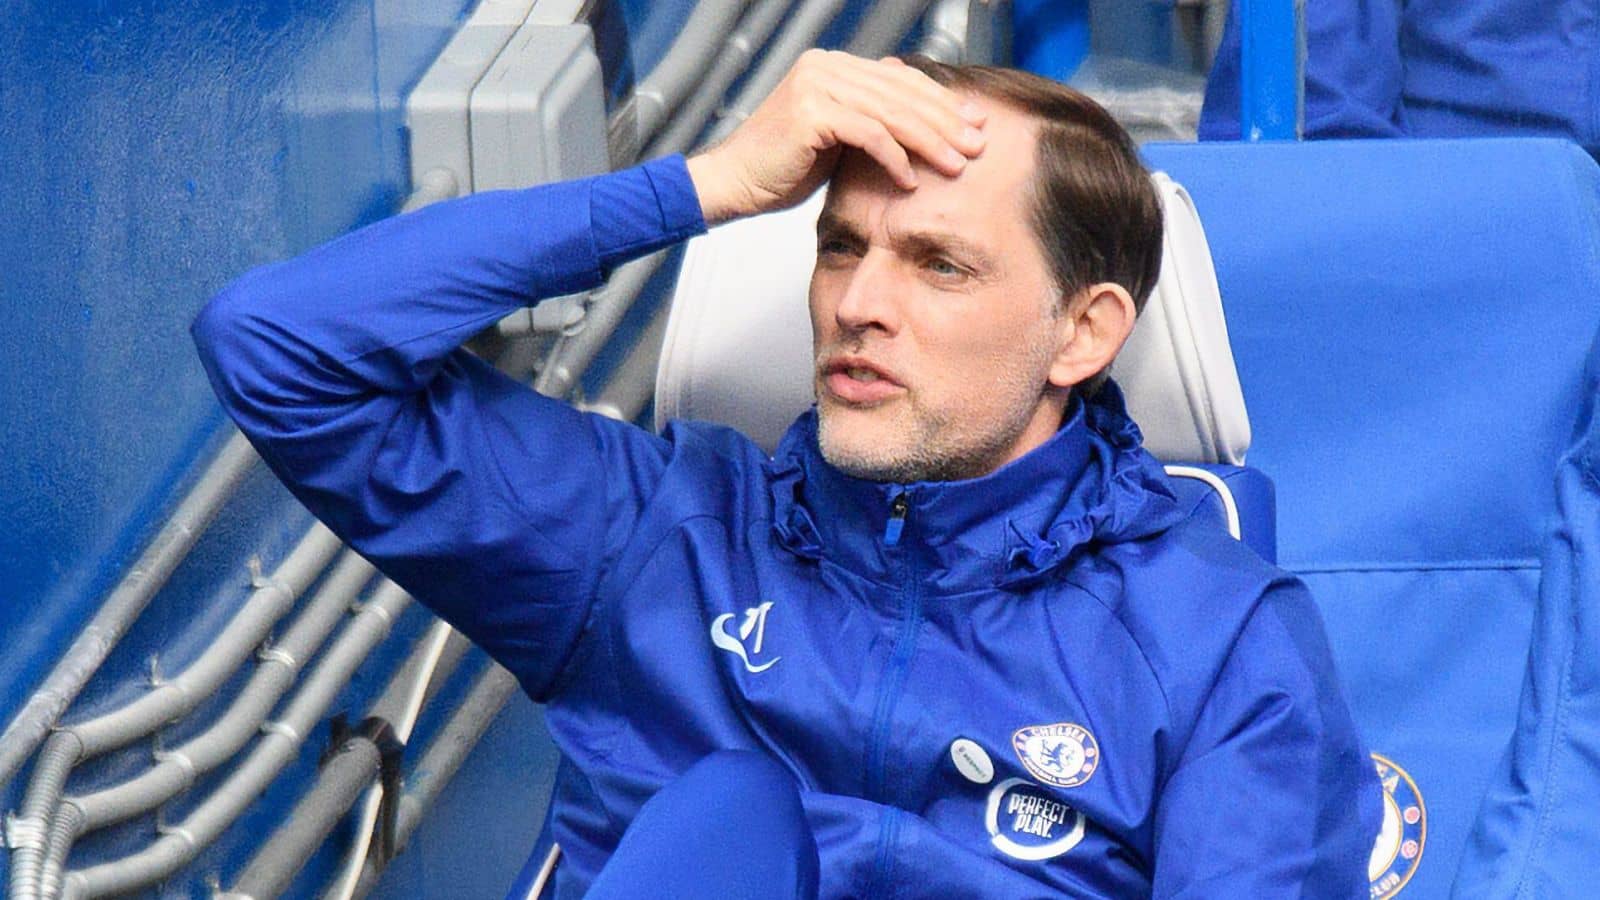 Thomas Tuchel could be sacked by Chelsea after recent poor form, claims Paul Robinson - Bóng Đá